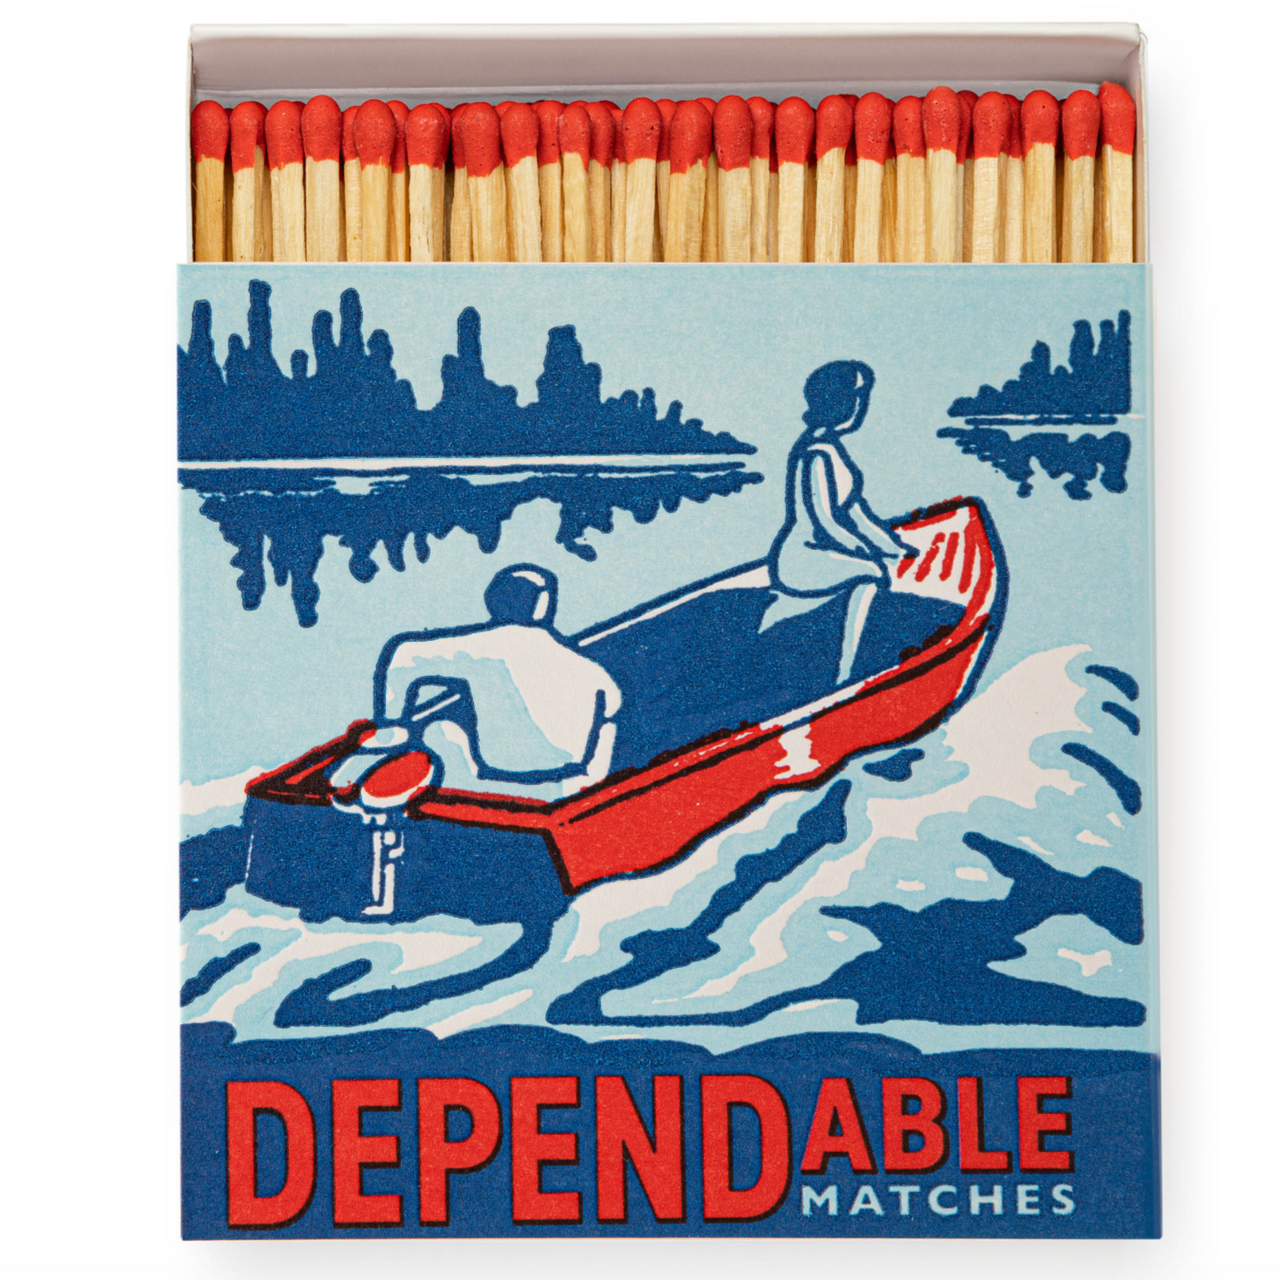 Dependable Matches